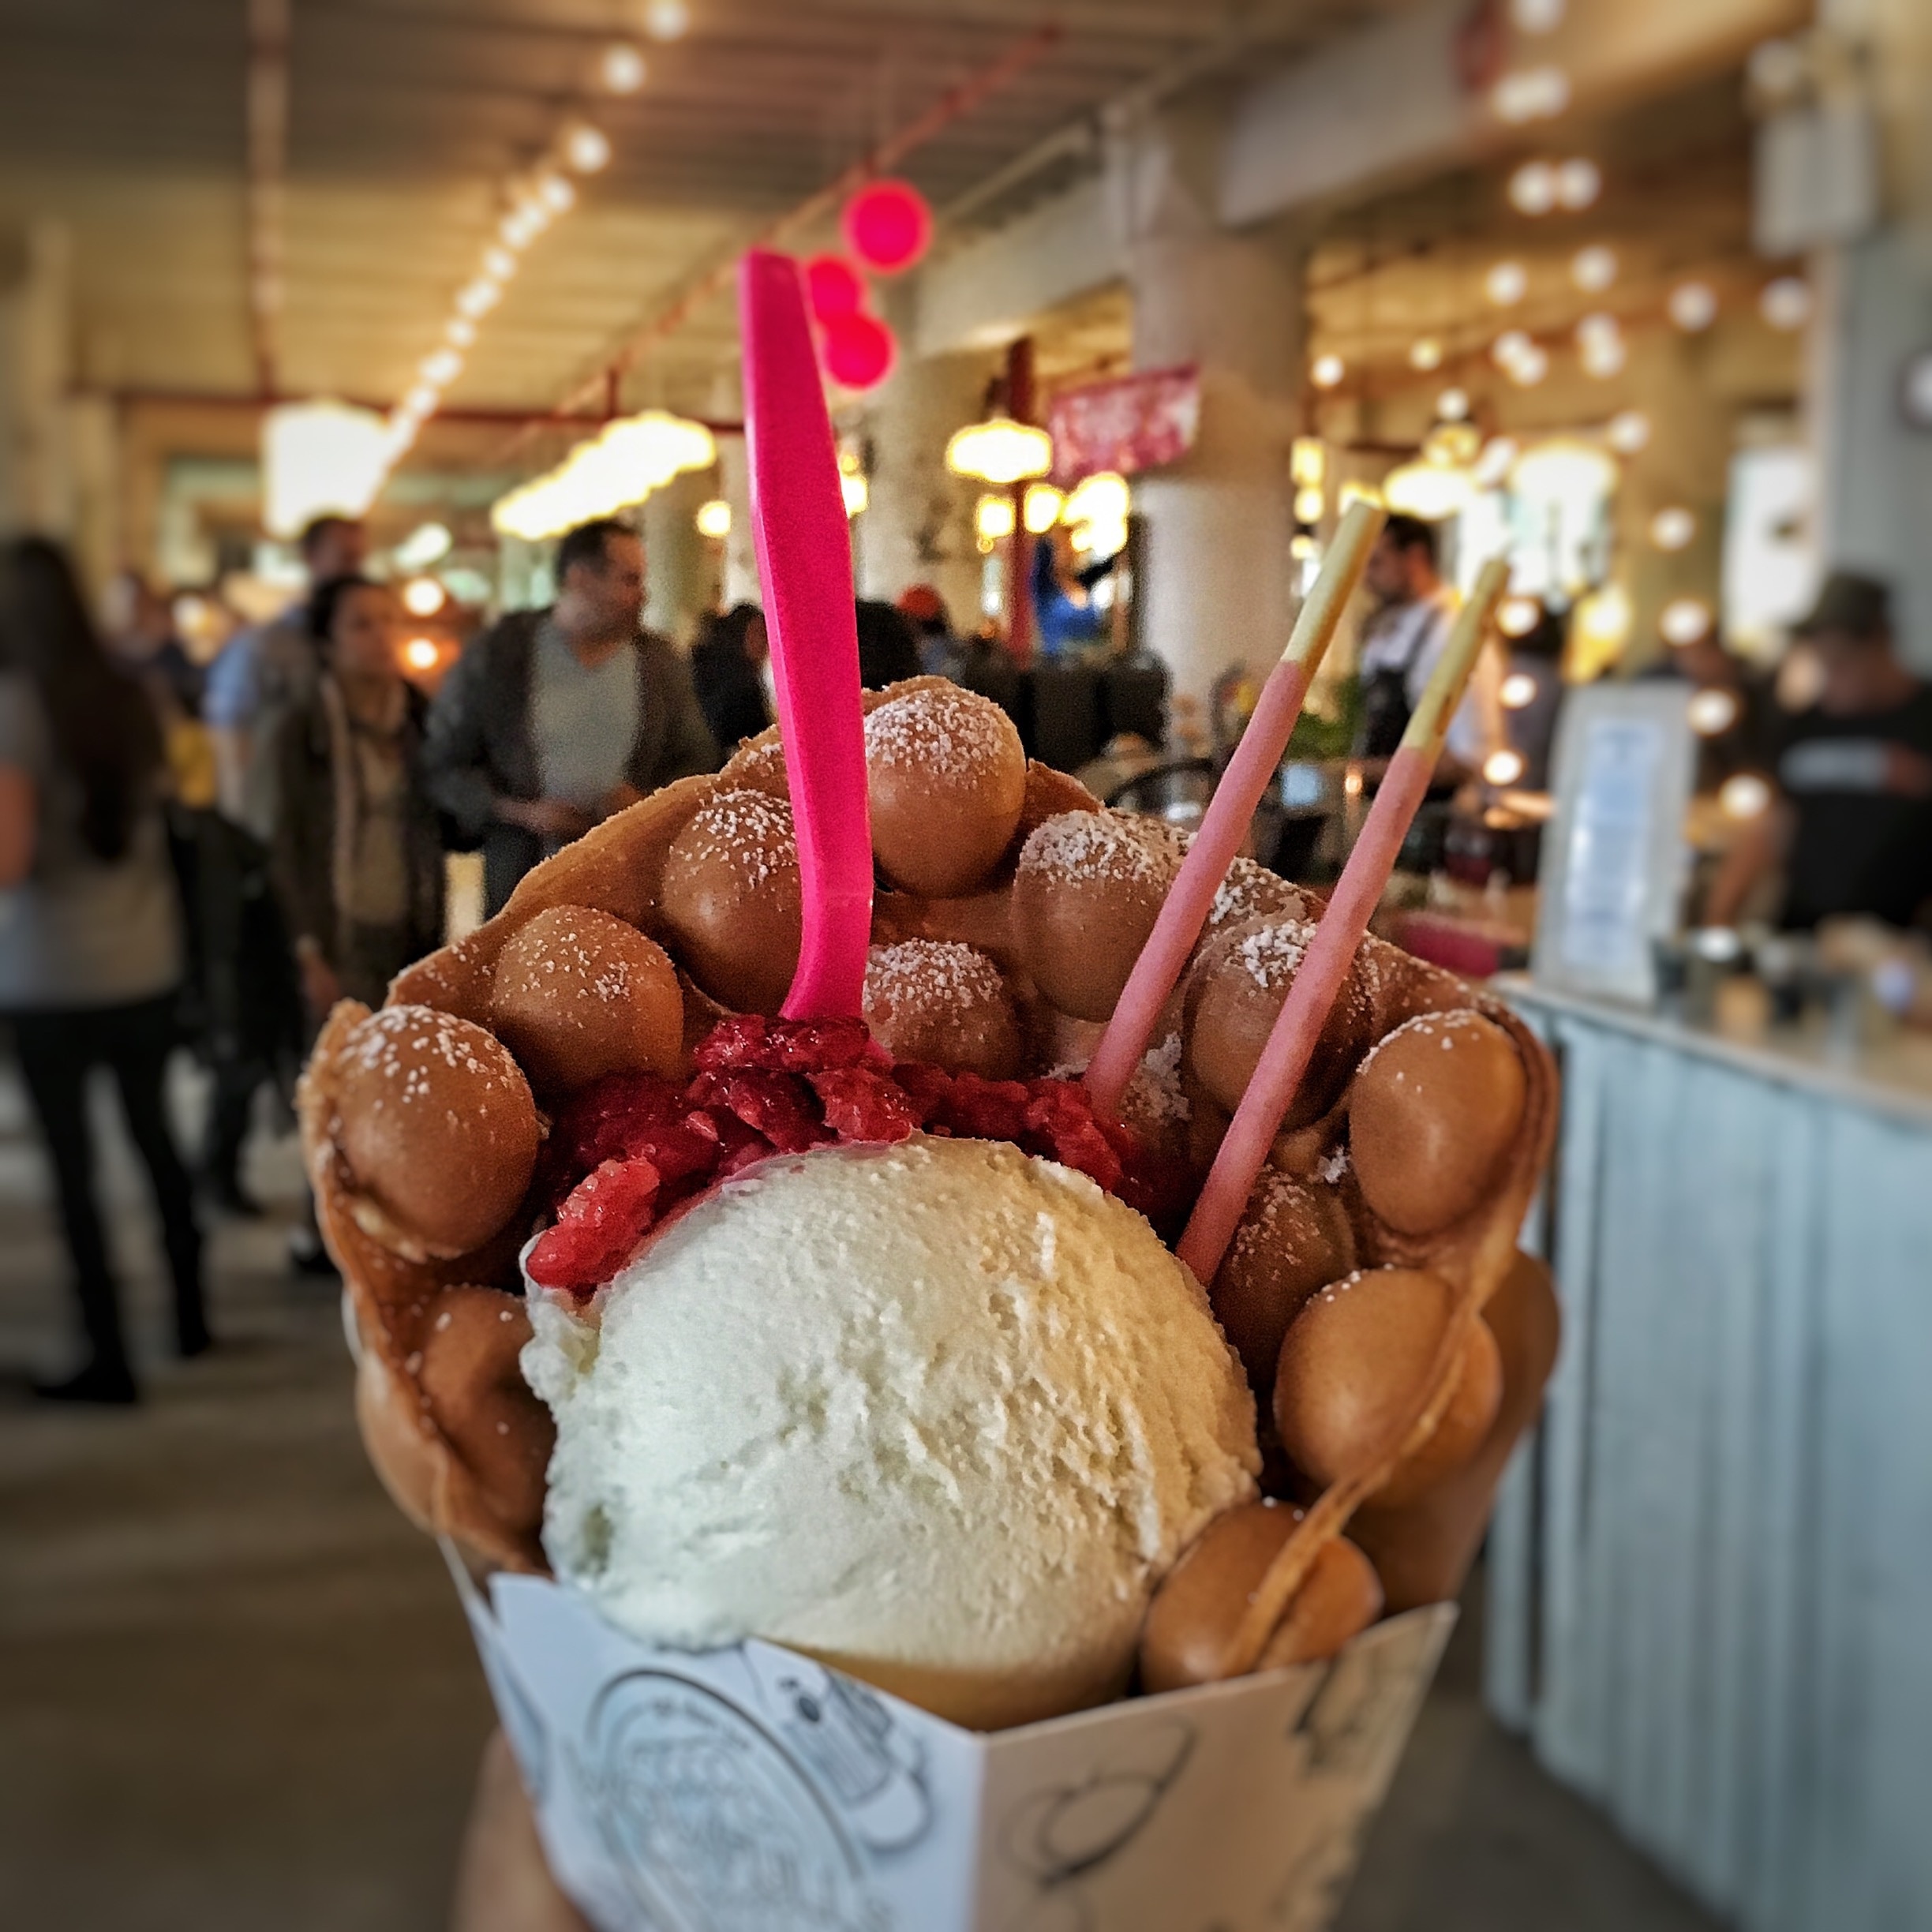 Smorgasburg is at Industry City for the winter. This #delicious confection is a Hong Kong egg cake with ice cream, Pocki sticks and raspberries!